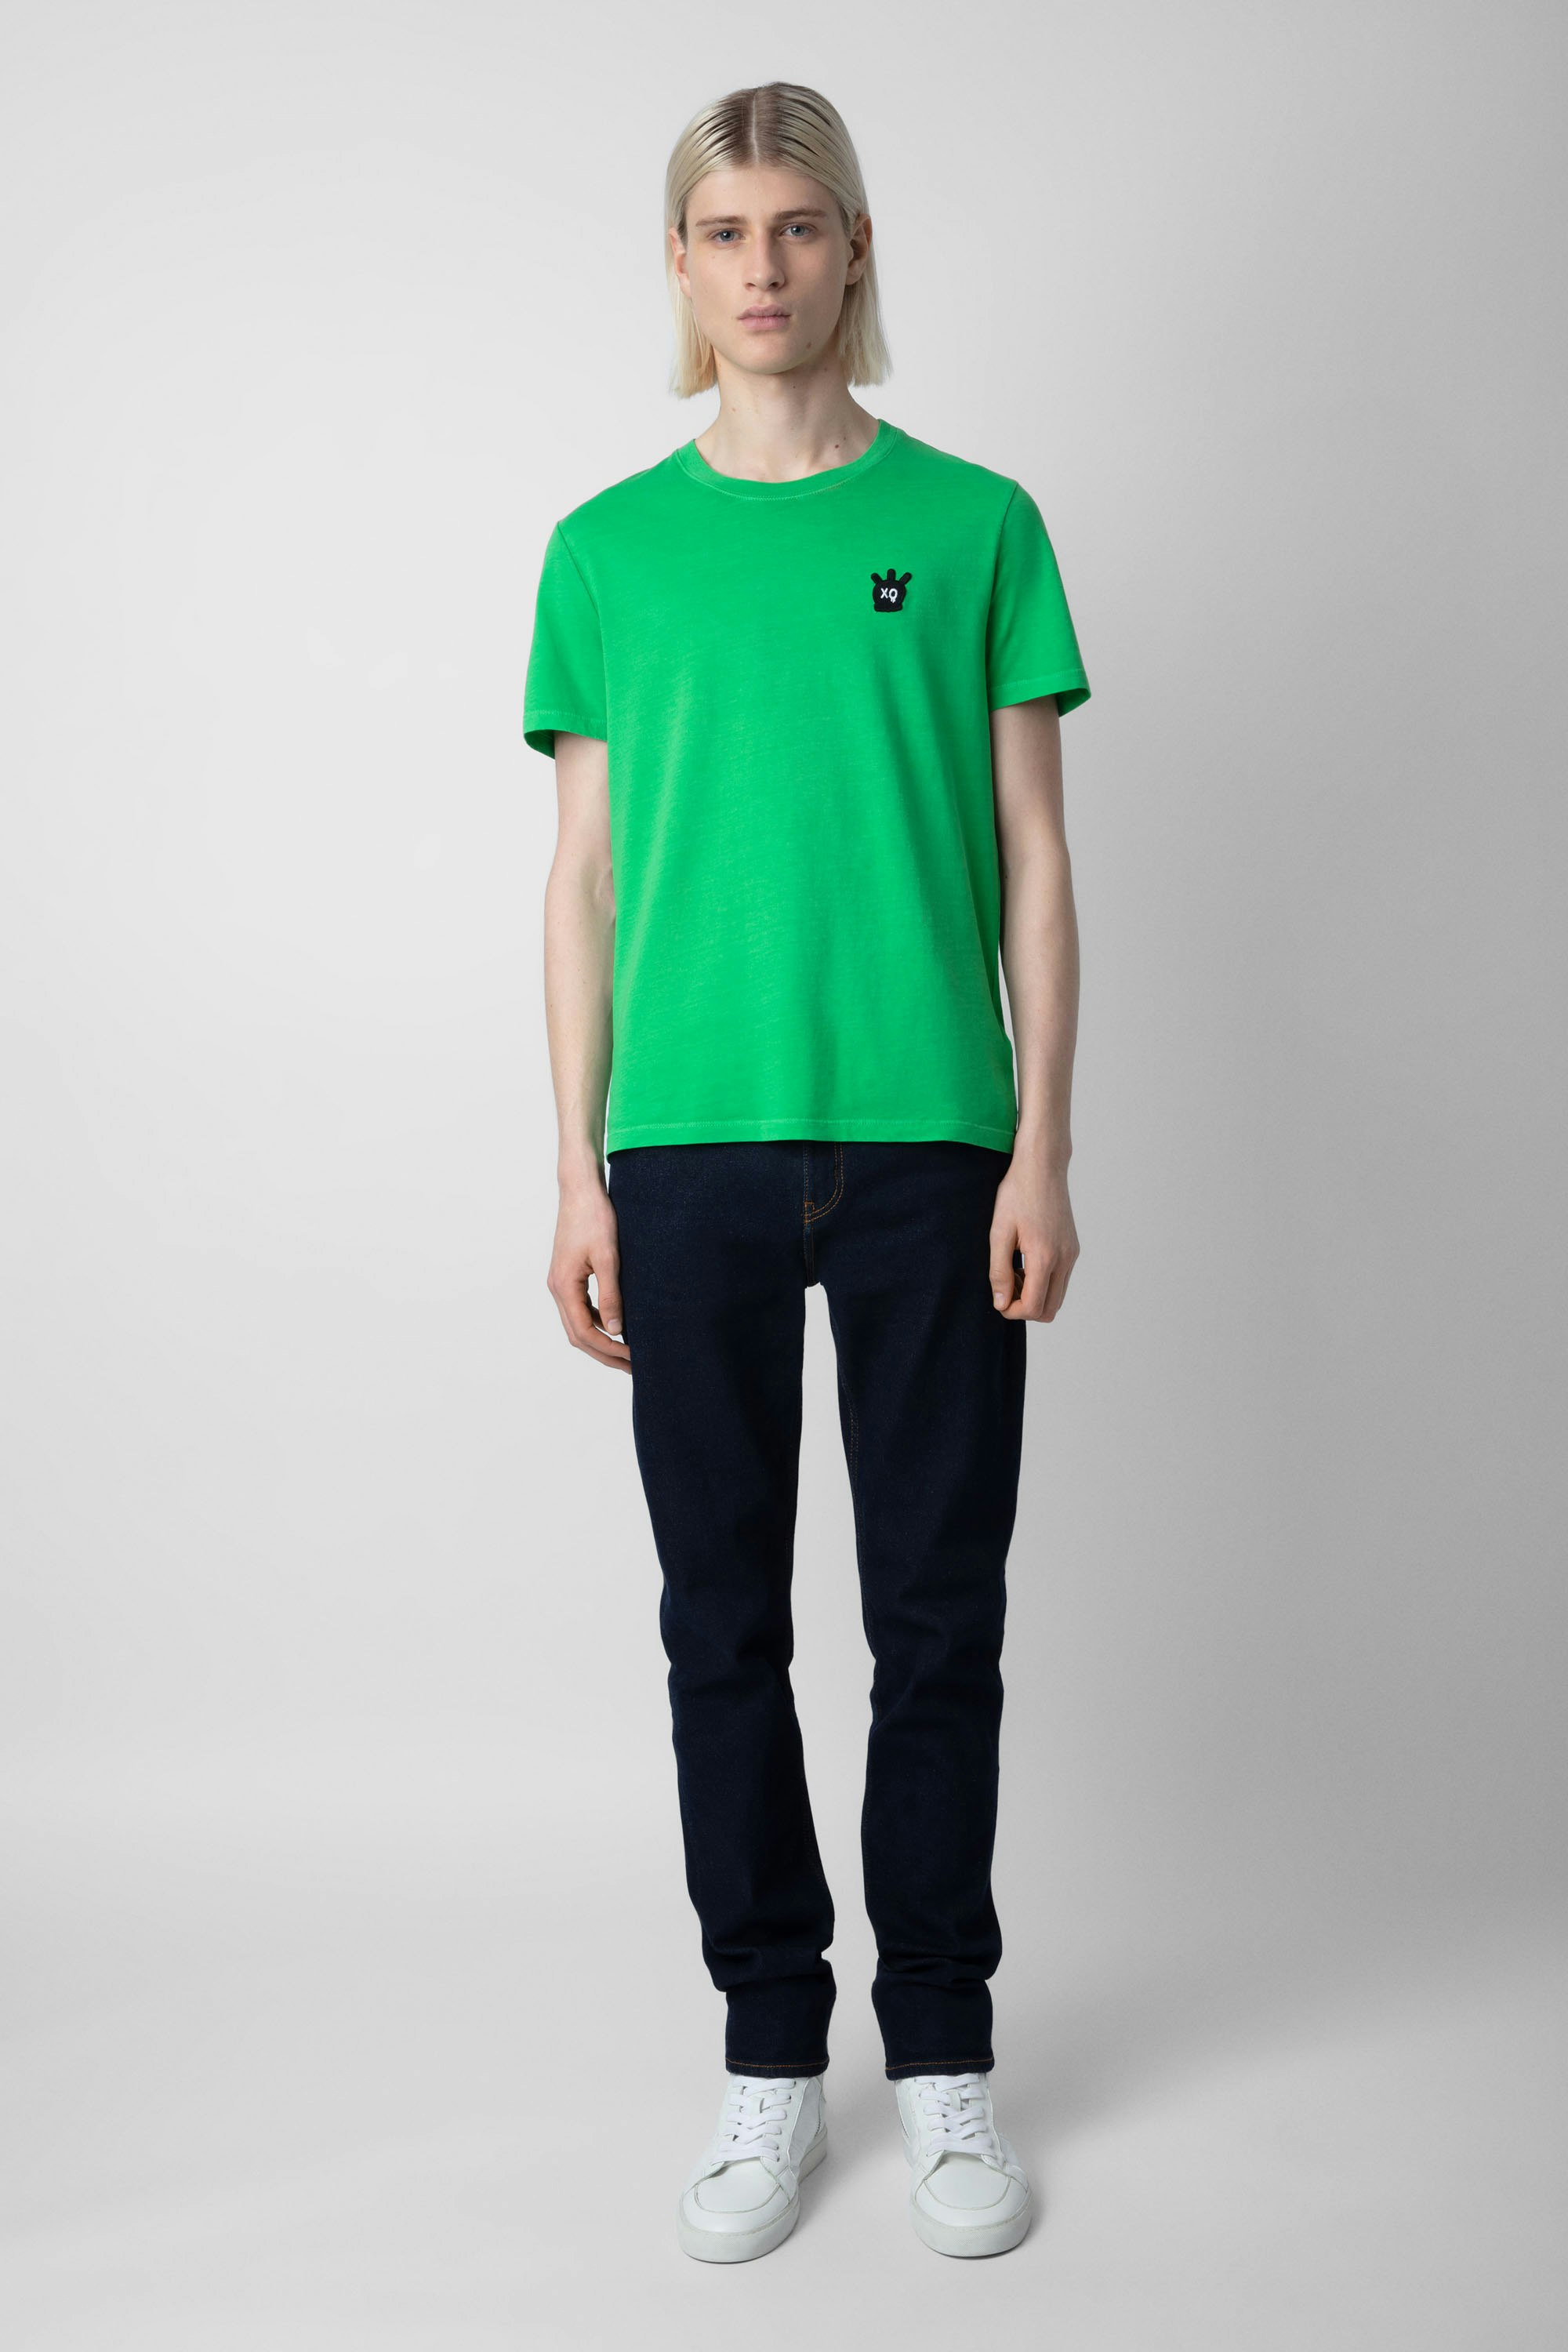 Tommy Skull T-shirt - Men's green cotton T-shirt featuring a Skull XO patch on the chest.